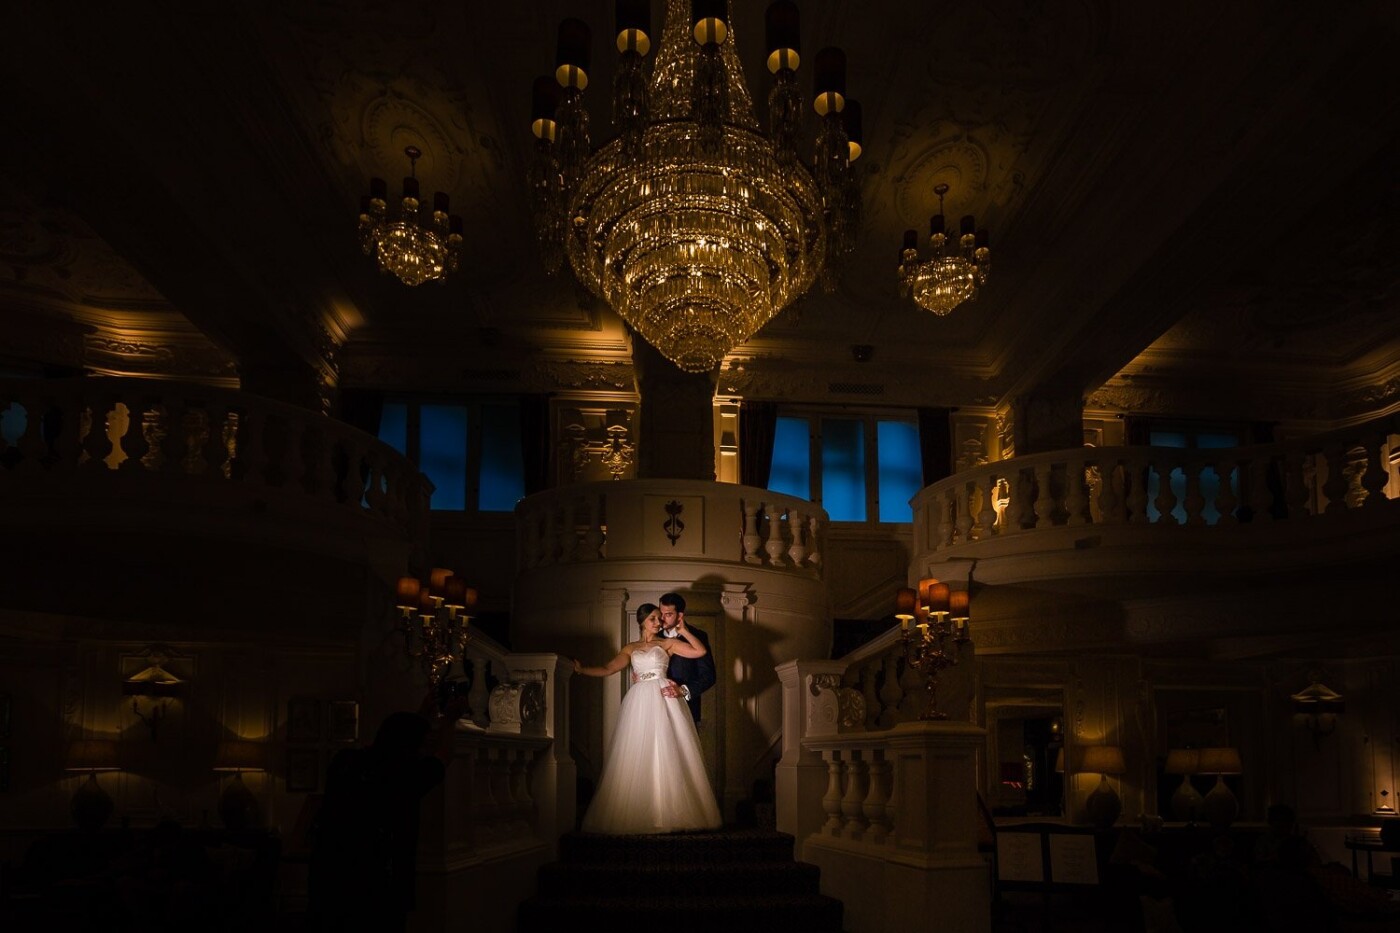 Nina and Matt got married at the stunning St Ermin's in Westminster, London.  One of the reasons they chose the hotel was because of its beautifully ornate rooms.  They knew they wanted a photo on the sweeping staircase in the hotel lobby but I wanted to create something dramatic for them befitting of the opulence of the hotel.  I would normally take a shot like this towards the end of the night but Nina was rushed into the hospital only a few days before the wedding for major surgery and, understandably it was looking like she might not have the energy to stay that late.  So in the late afternoon as the guests were taking their seats for the wedding breakfast we took a little time out to create this shot.  I exposed for the chandelier and the various lights in the lobby and used a video light to highlight the couple.  Thankfully the couple is as delighted with the image as I am.